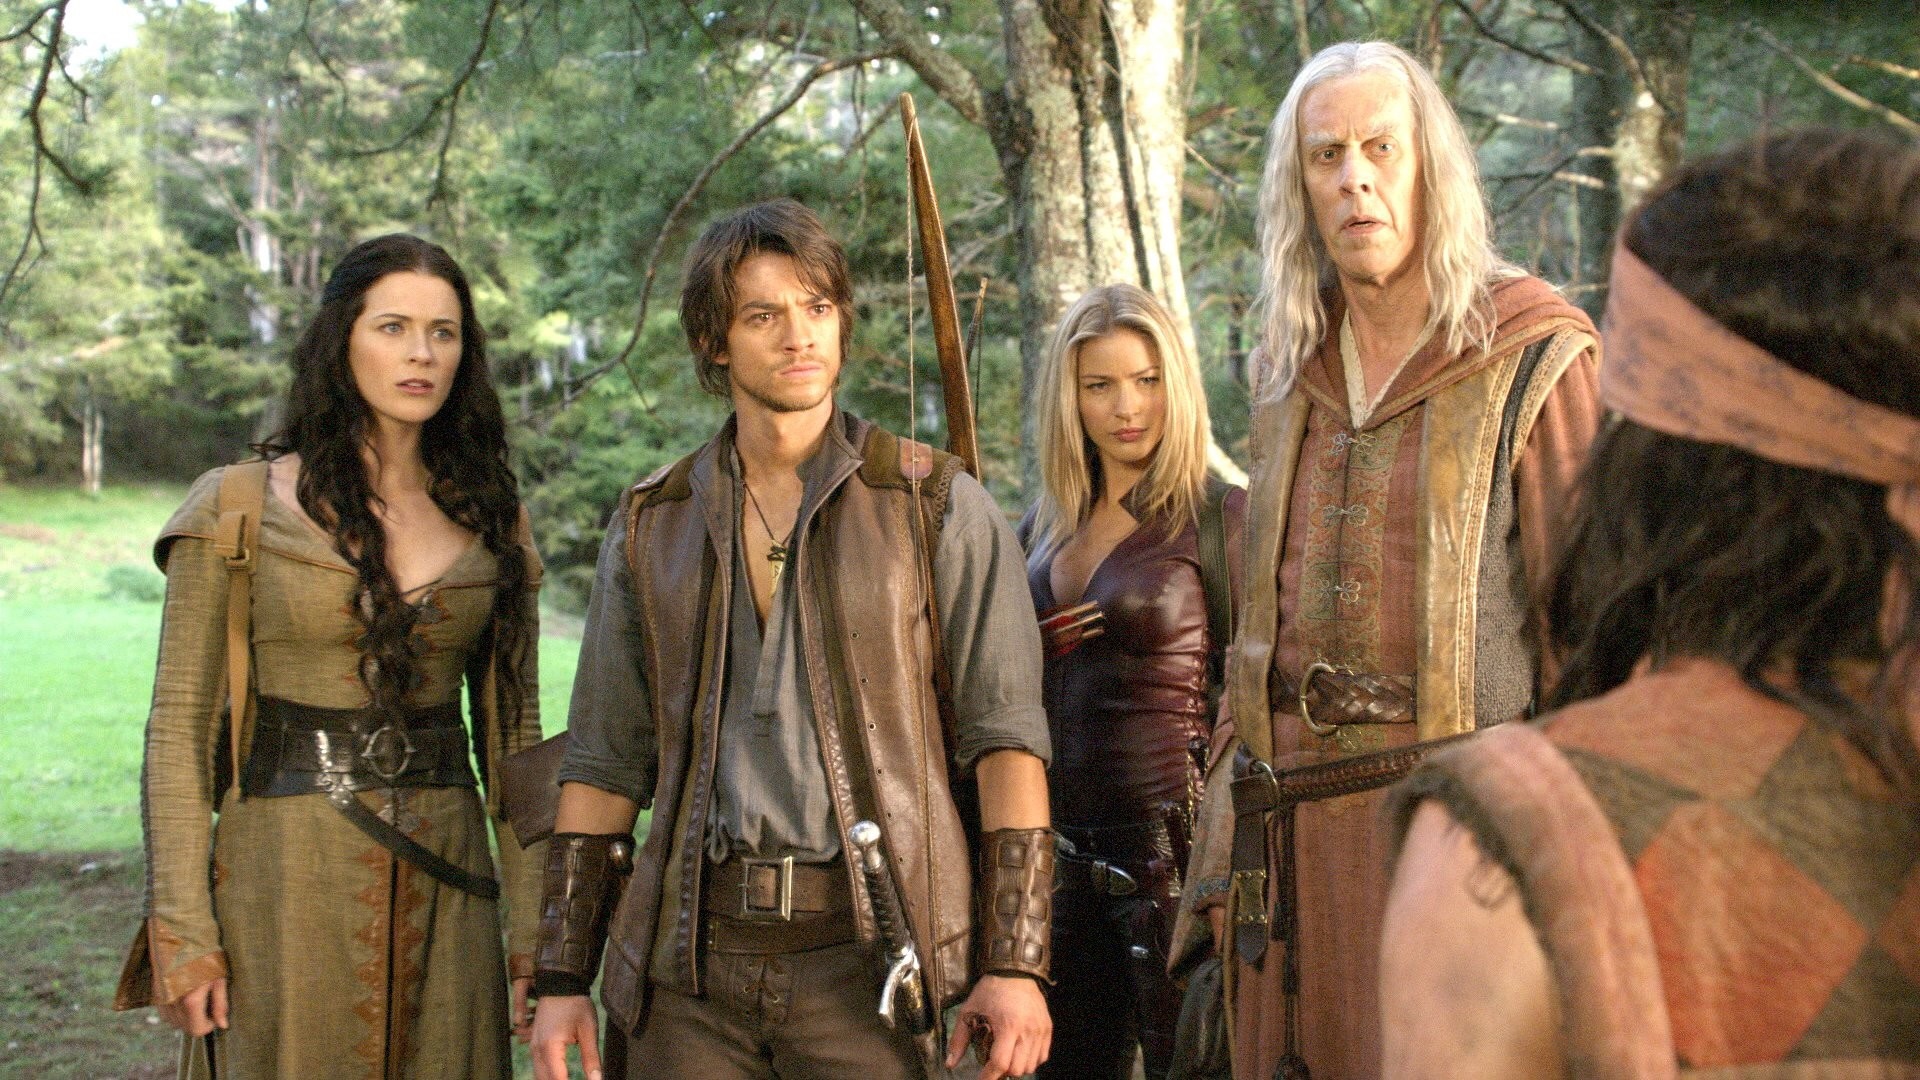 Legend of the Seeker (TV Series): Kahlan Amnell, Richard Cypher, Tabrett Bethell as Cara Mason and Bruce Spence. 1920x1080 Full HD Background.